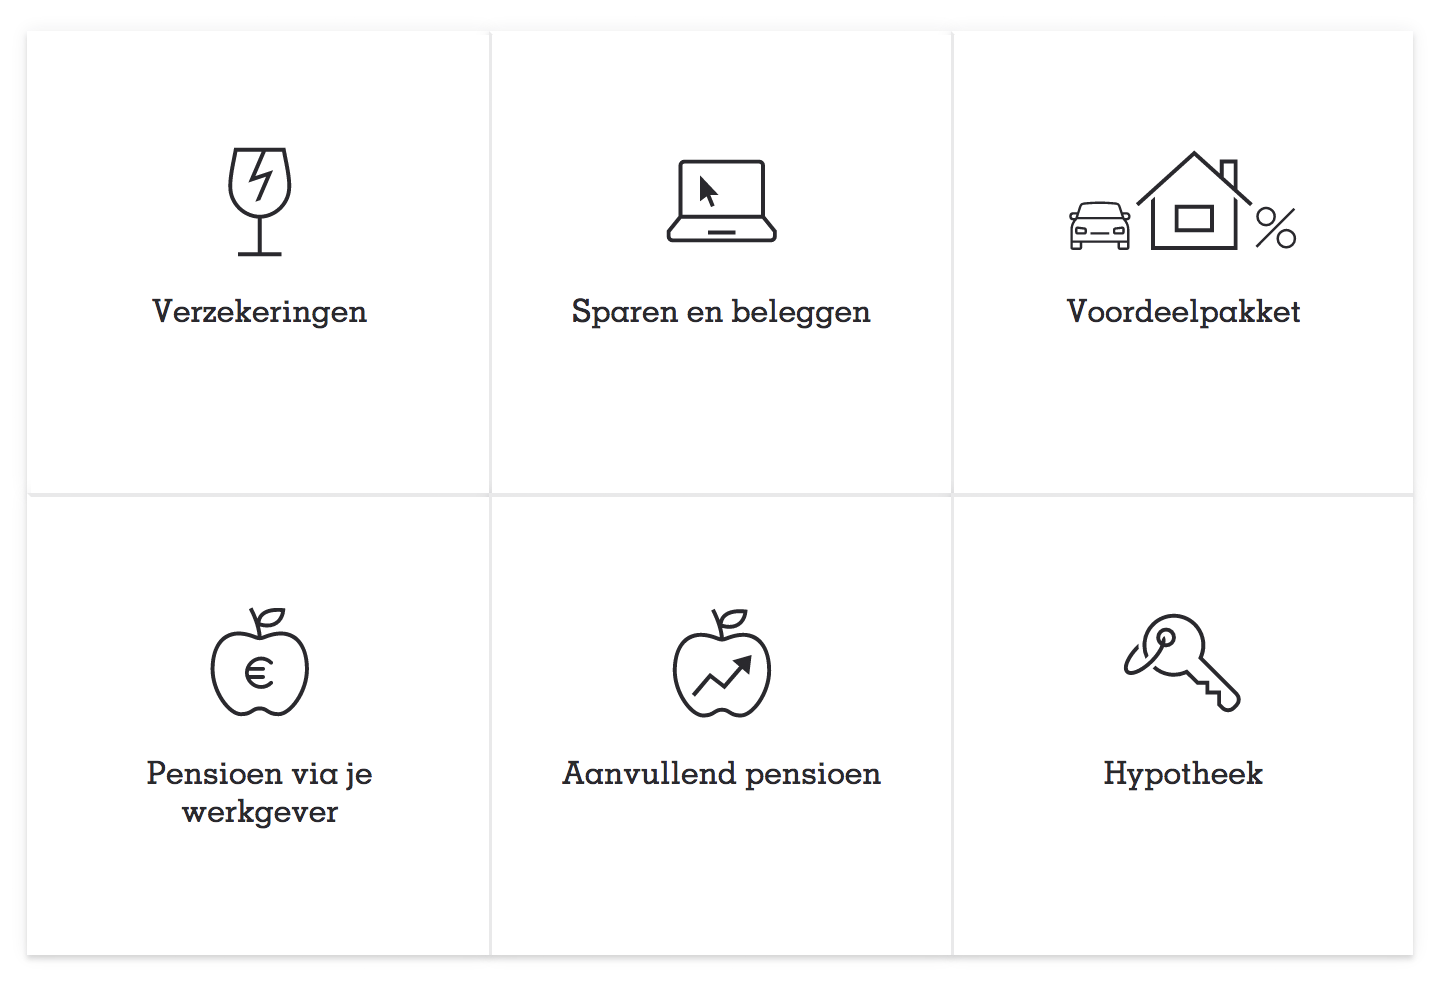 studio dumbar designs a.s.r. the Dutch insurance company with a new conversational platform with chat UI icon design